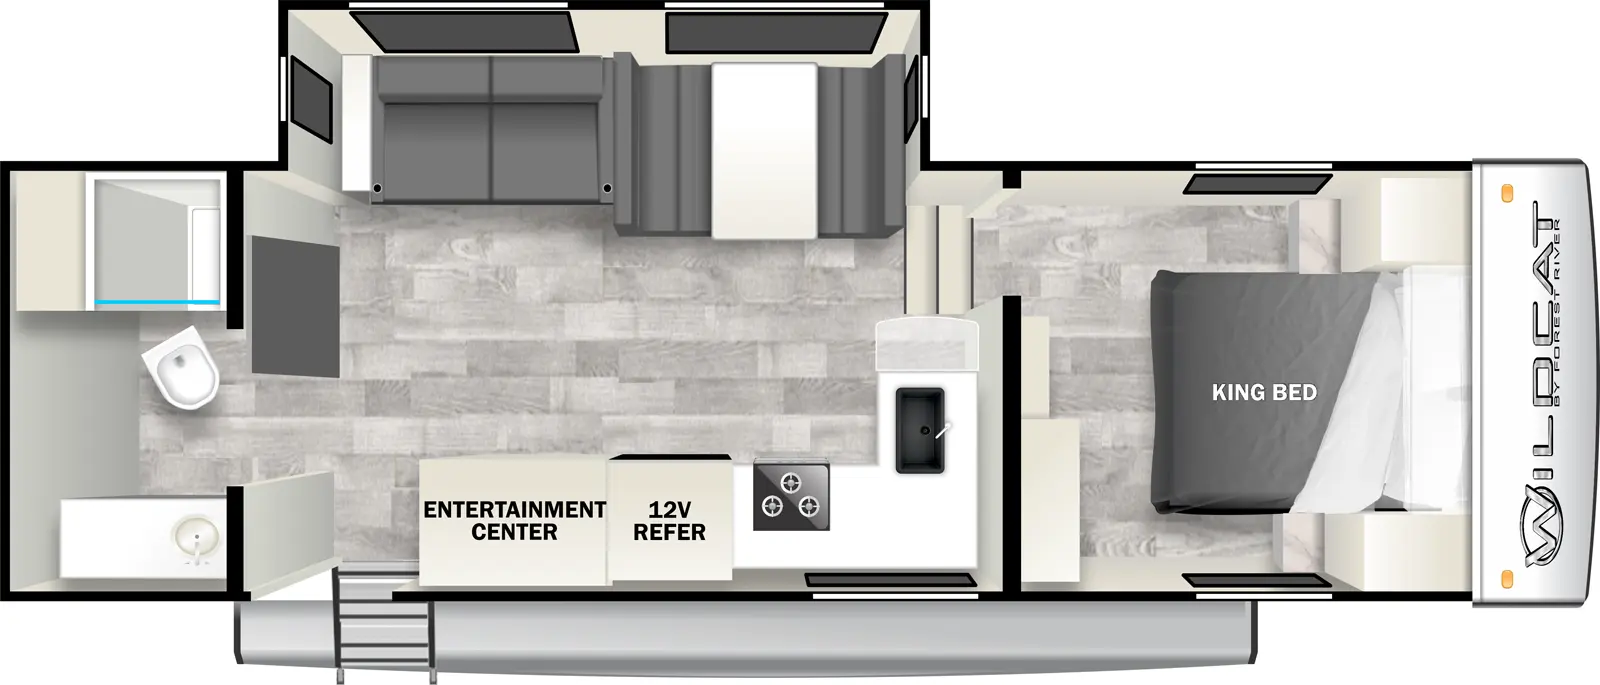 The 27RB has one slideout and one entry. Interior layout front to back: foot-facing king bed; steps down to main living area; off-door side slideout with dinette, and seating; kitchen counter with sink wraps from inner wall to door side with cooktop, 12V refrigerator, entertainment center, and entry; rear full bathroom.